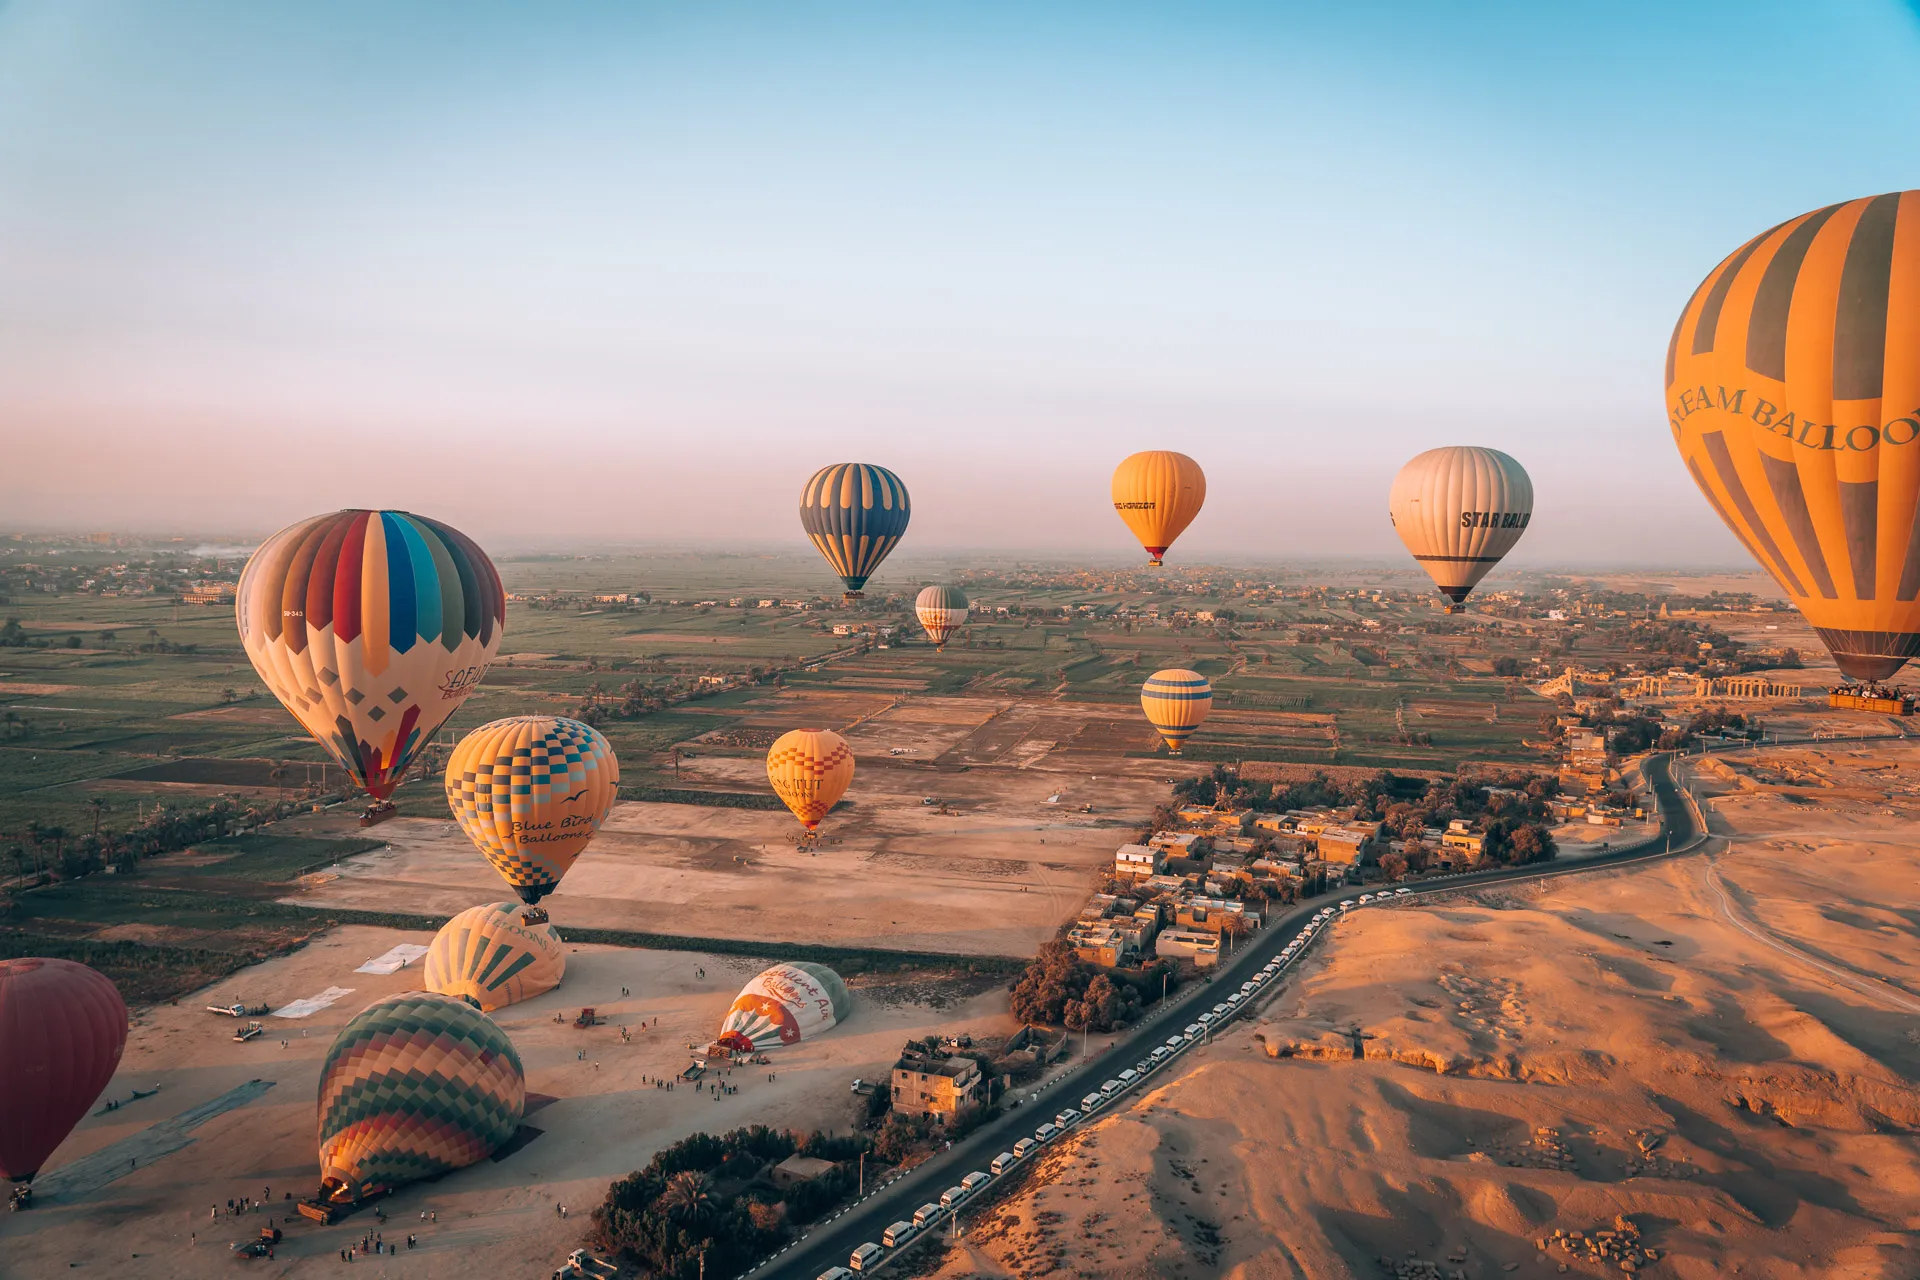 56 flying balloon flights were launched in the sky of Luxor to witness the magic of the Pharaonic civilization